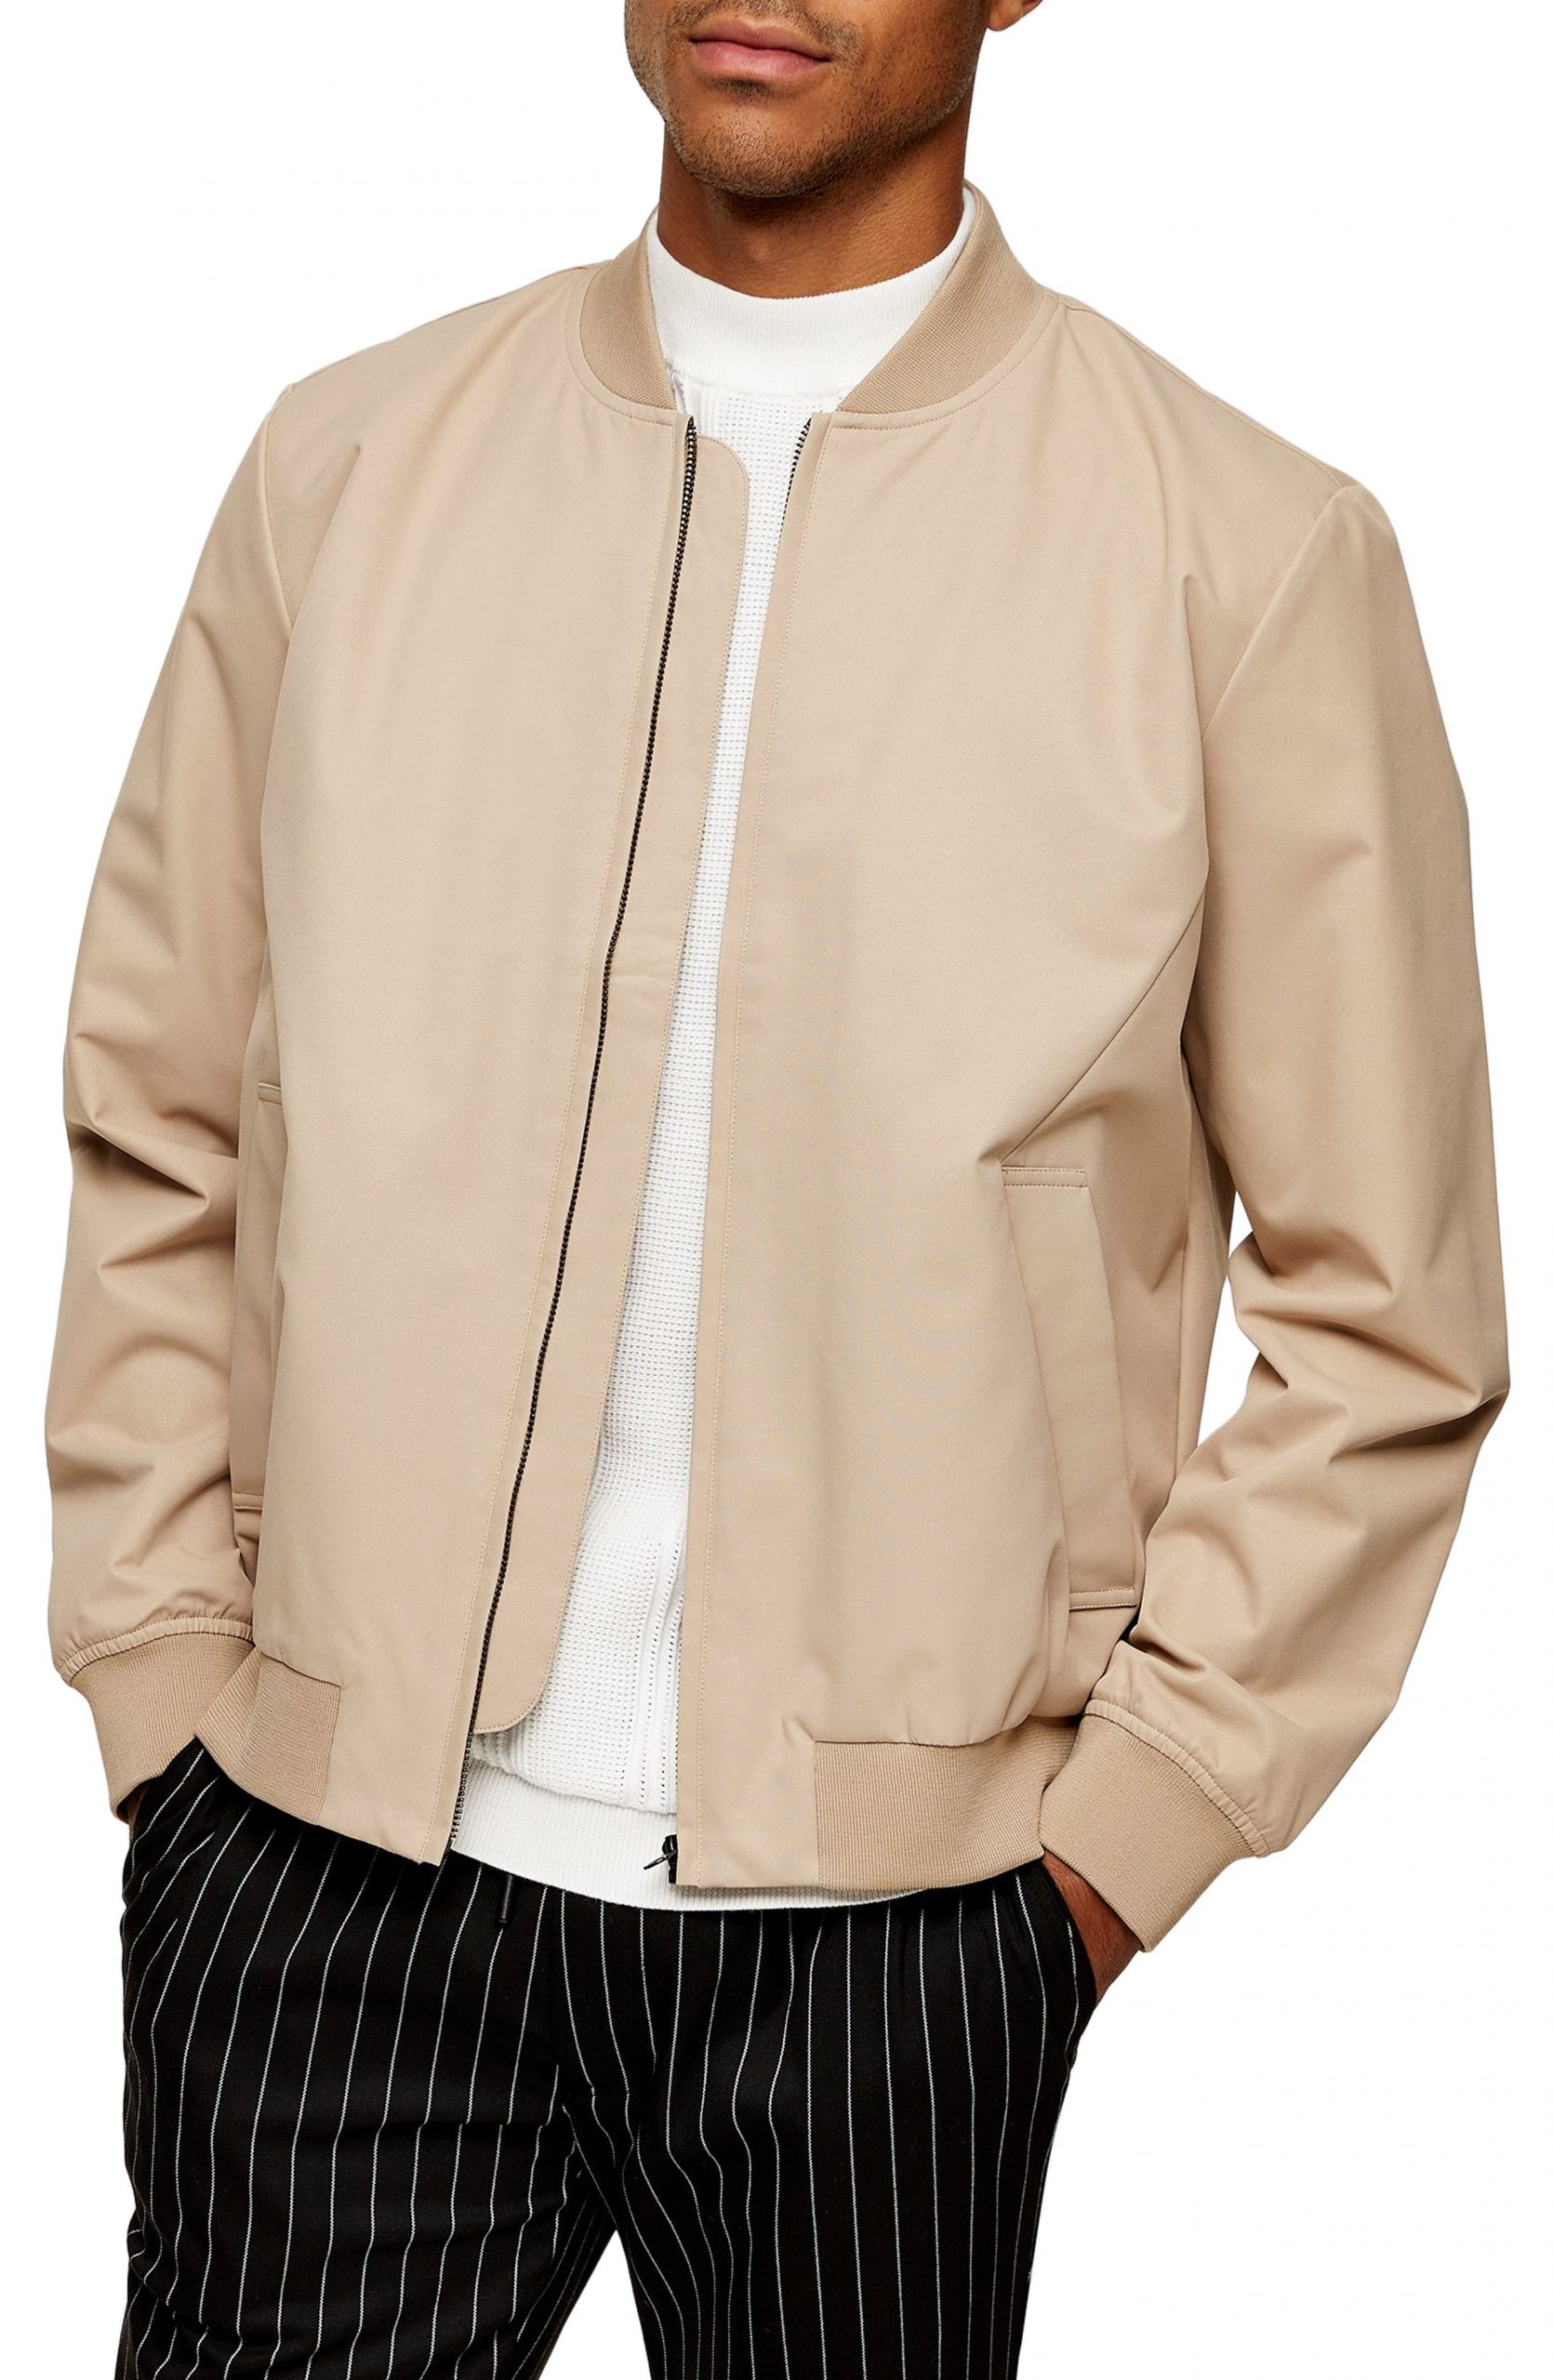 Men’s Topman Icon Classic Bomber Jacket, Size X-Small - Beige | The ...